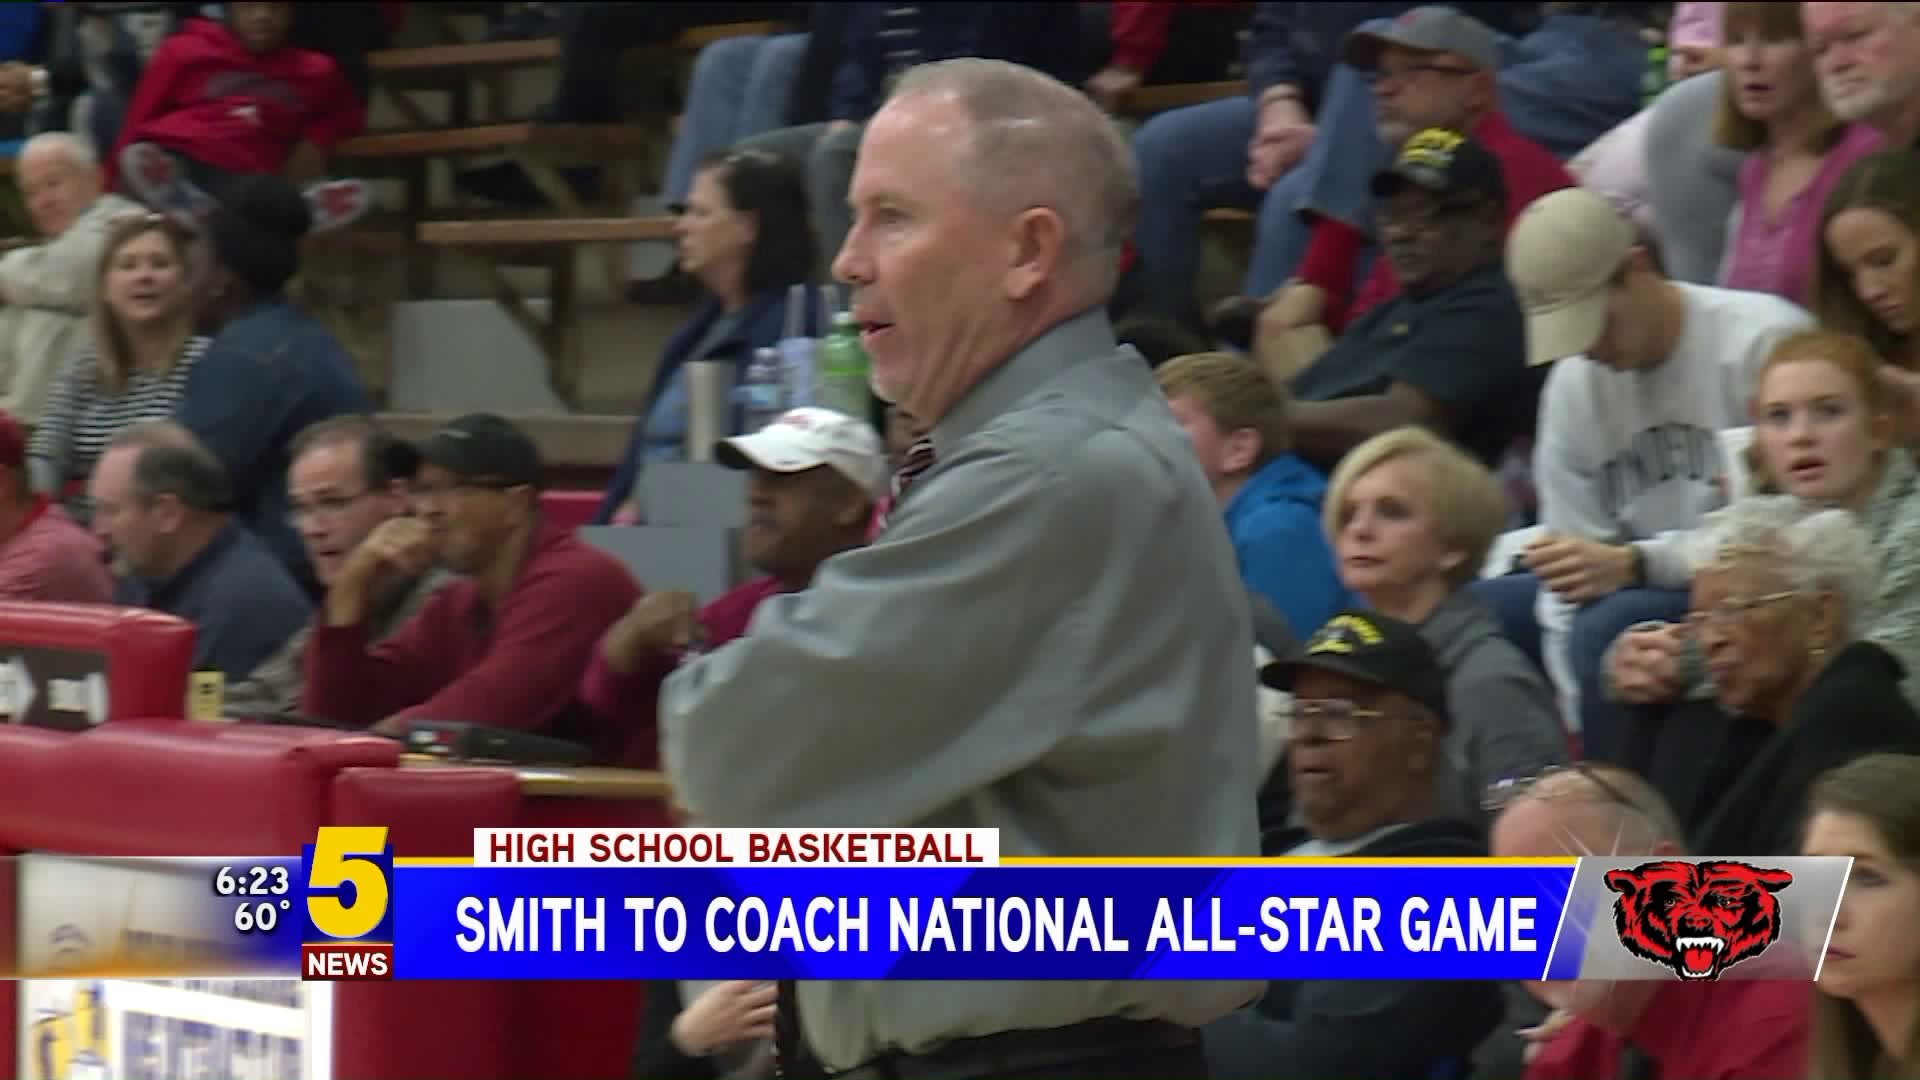 Smith to coach national all-star game